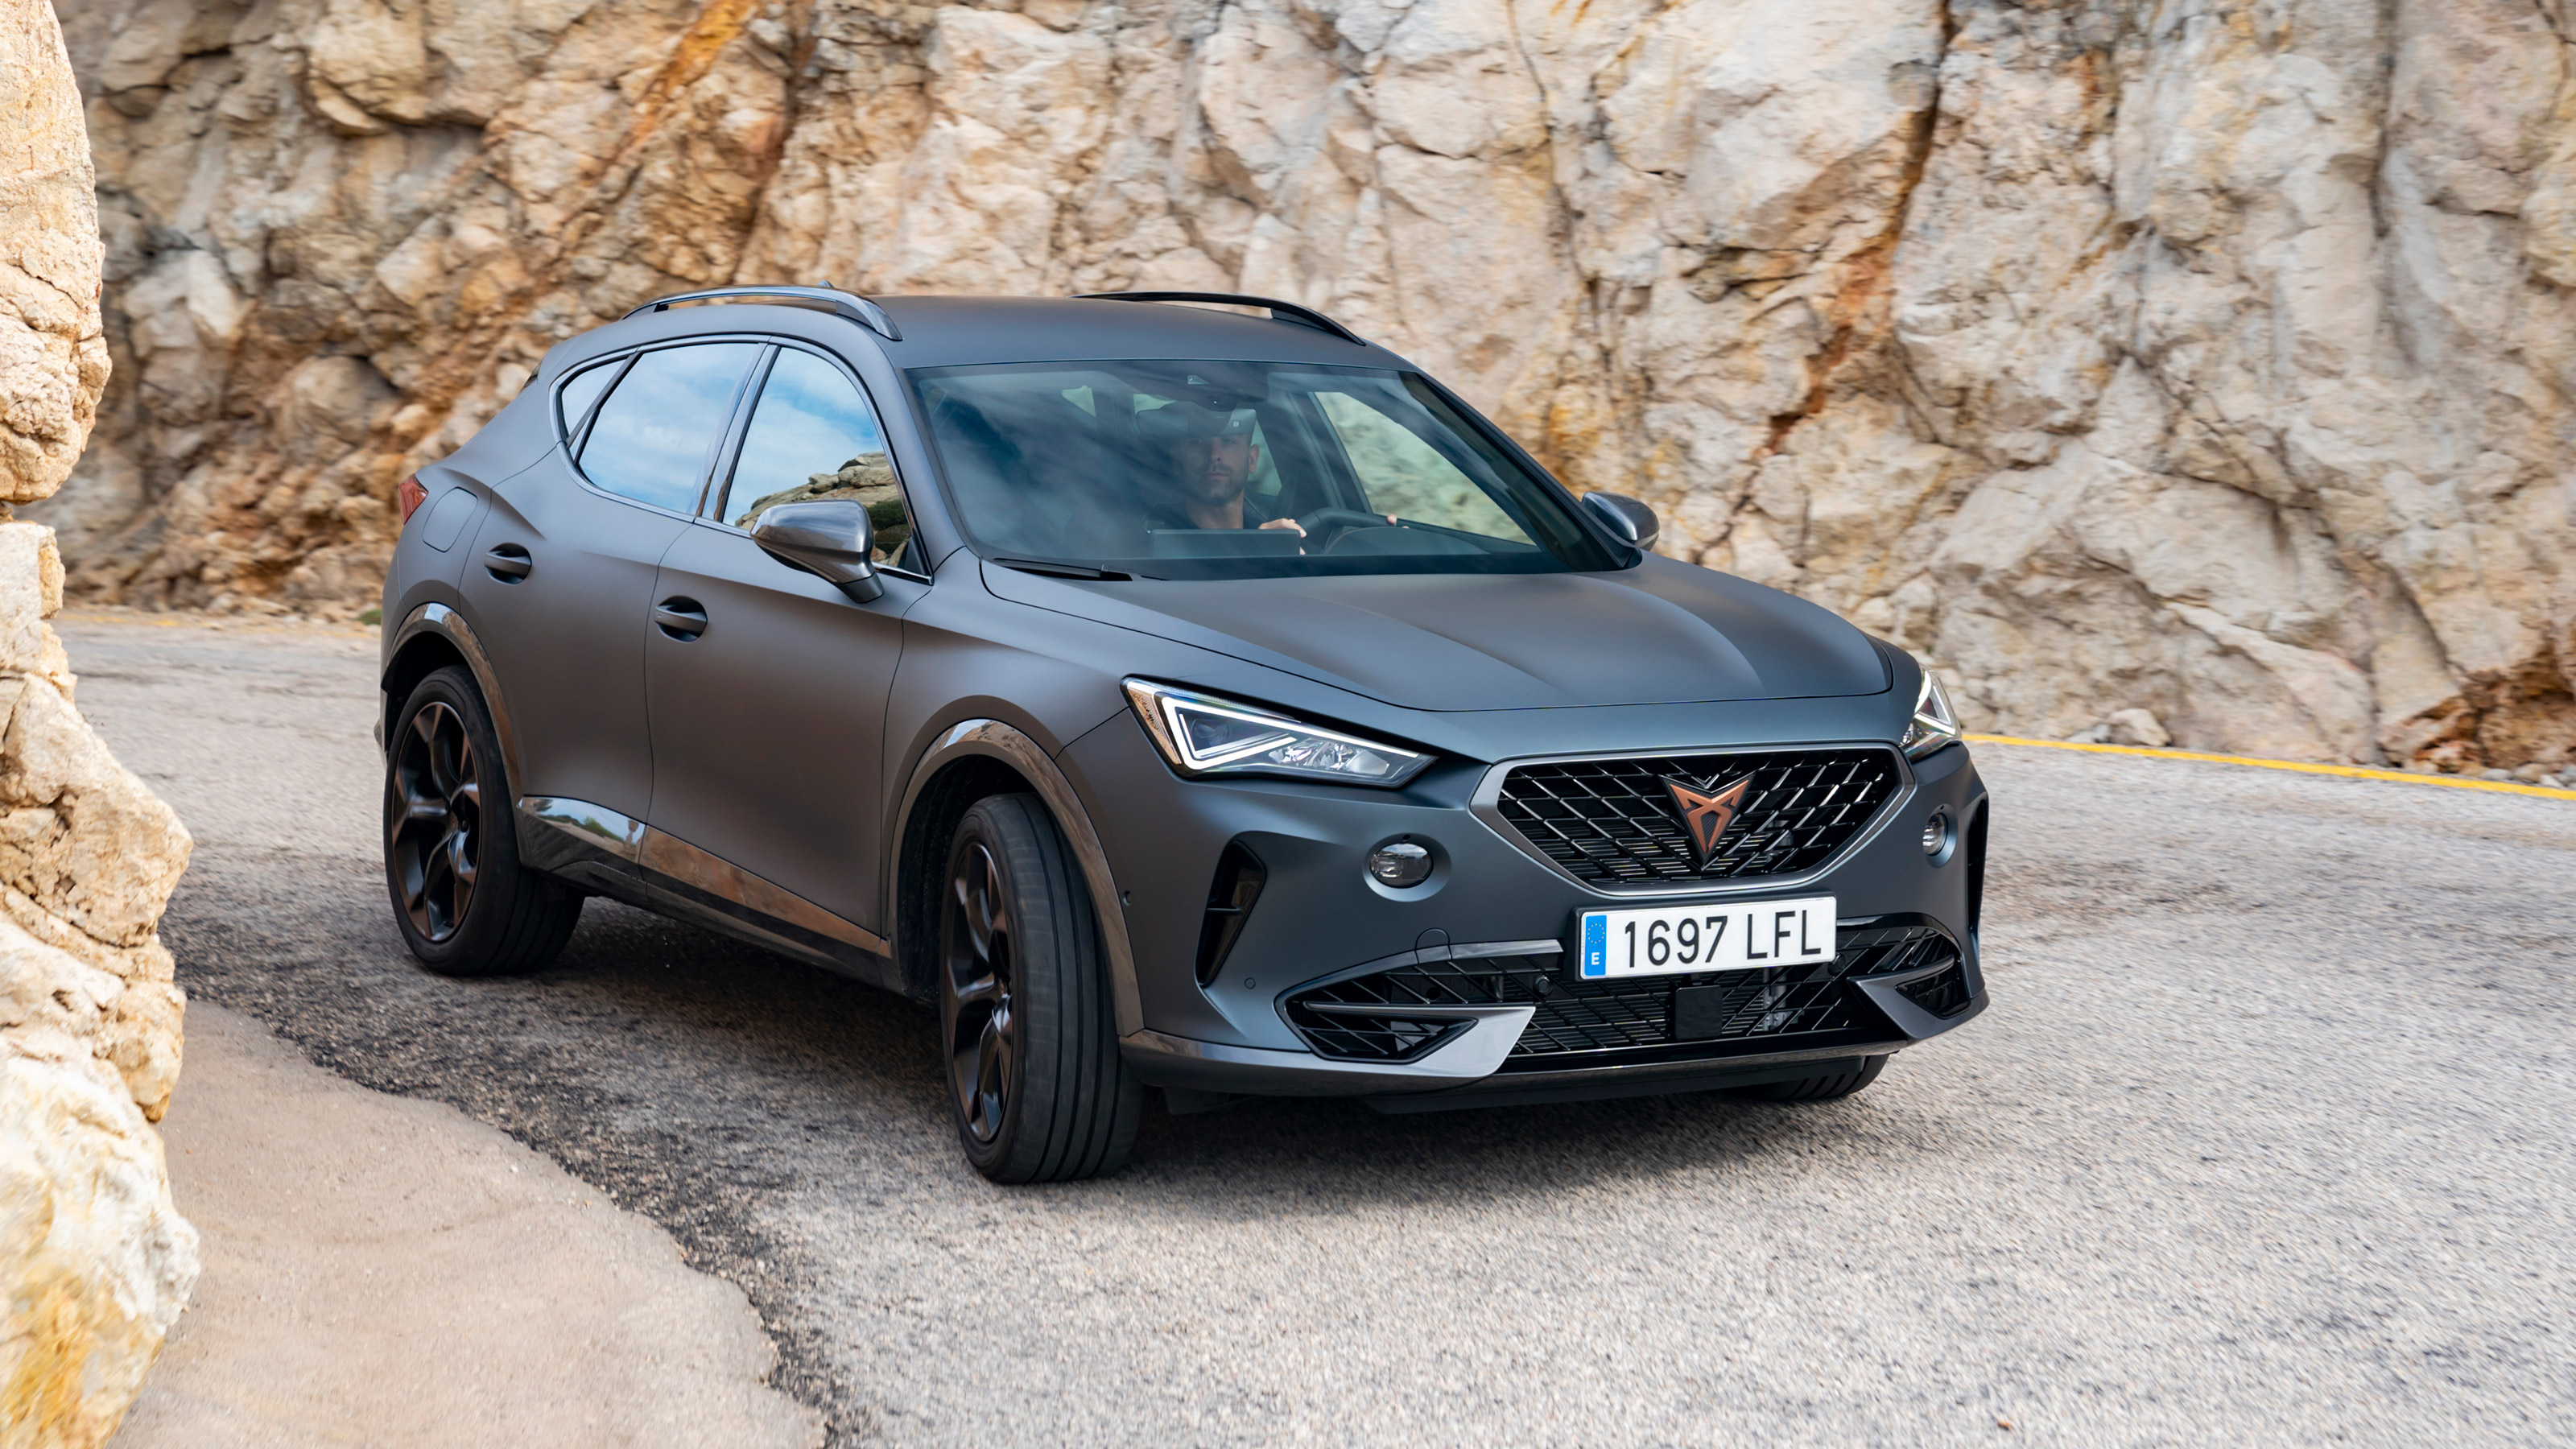 2020 Cupra Formentor priced from £39,830